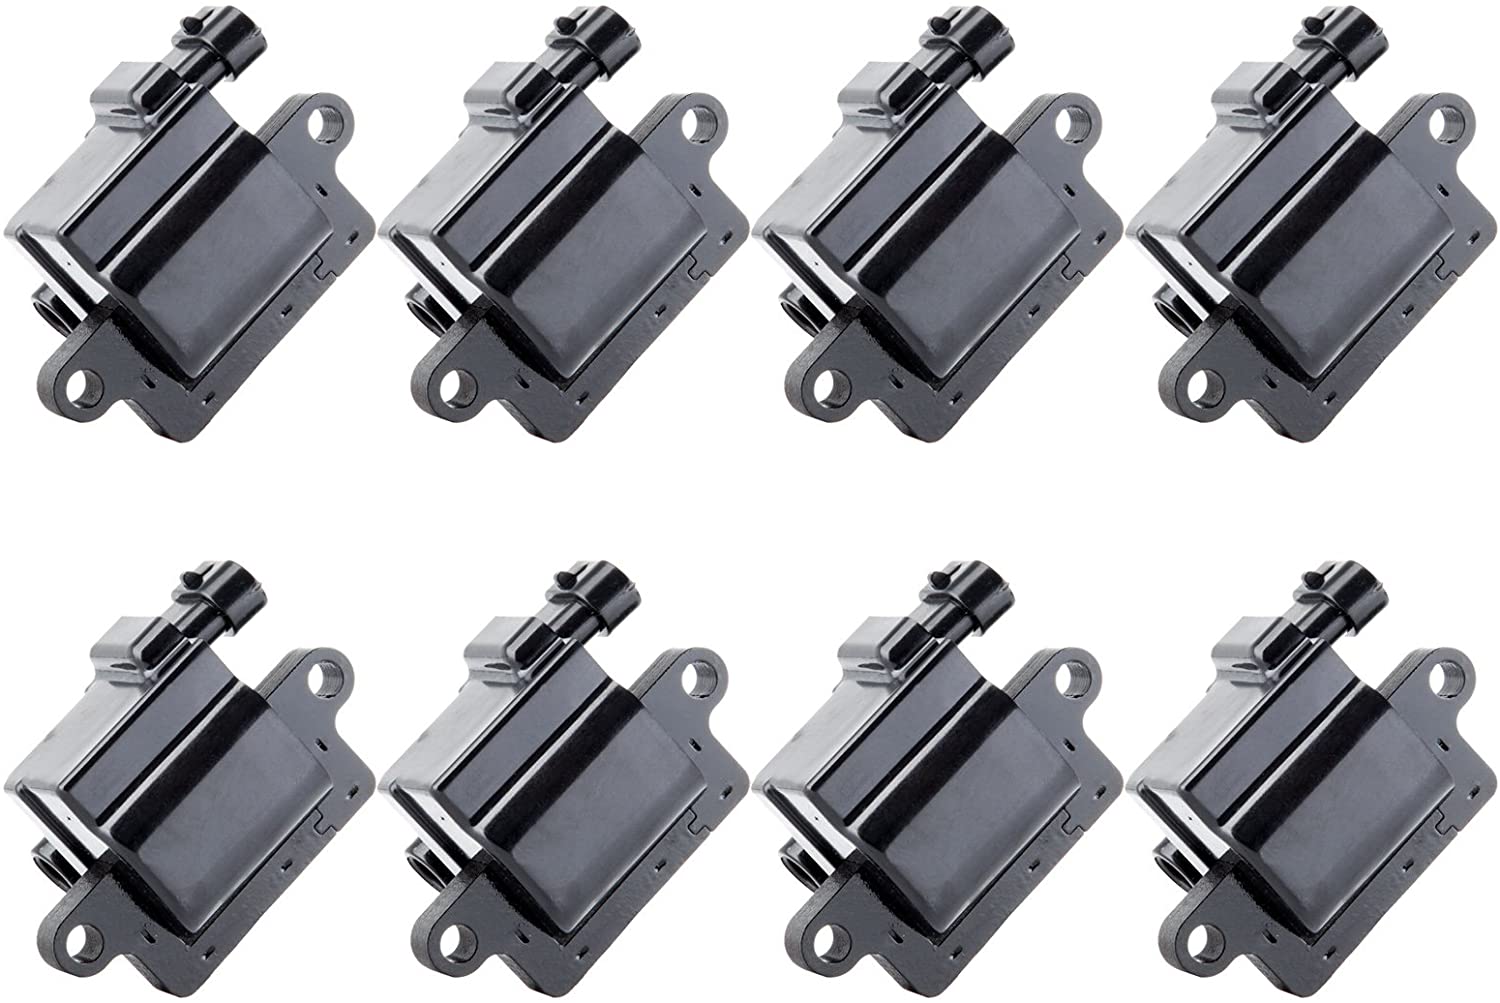 OCPTY Set of 8 Ignition Coils Compatible with OE: UF271 C1208 Fit for Chevy GMC Hummer Mercruiser Workhorse 1999-2007